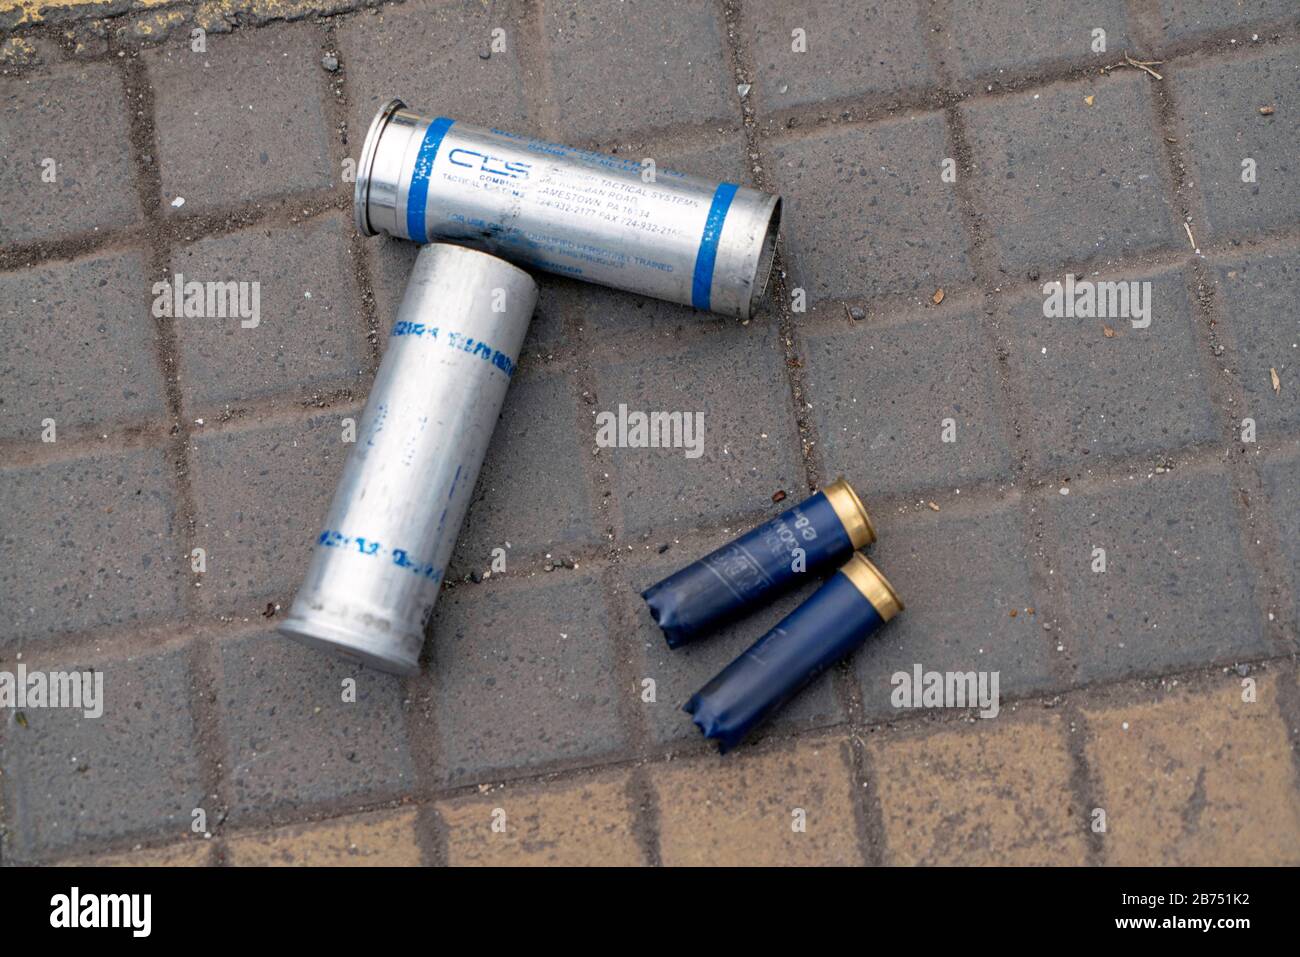 Chile, Santiago, 20.10.2019. Santiago in state of emergency on 20.10.2019. shells of tear gas and rubber bullets. The violent protests had started after a fare increase of the subway in Santiago. Chile's president Sebastian Piñera then declared a state of emergency on Friday evening. After renewed arson attacks on subway stations, a curfew was imposed in the Chilean capital on Saturday. [automated translation] Stock Photo